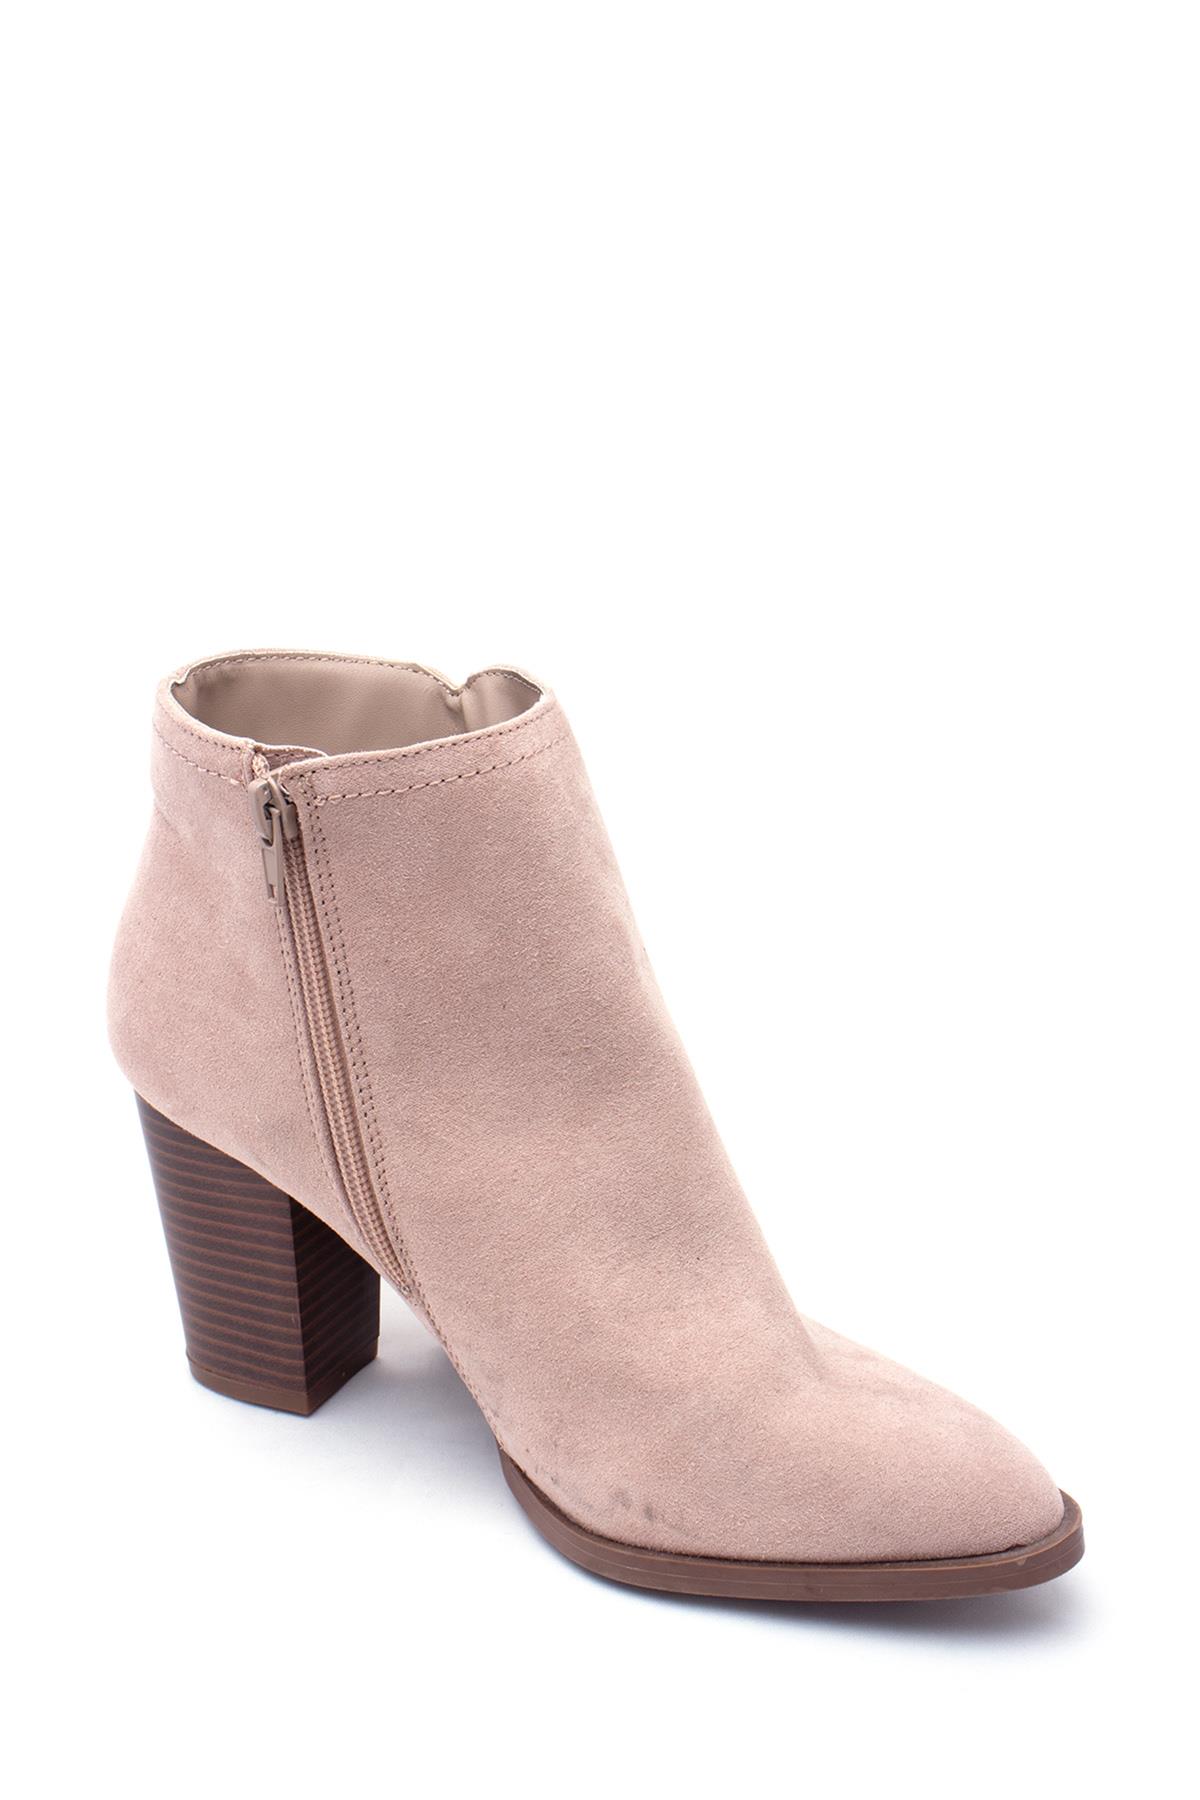 SIDE FRINGE BOOTIE 12 PAIRS